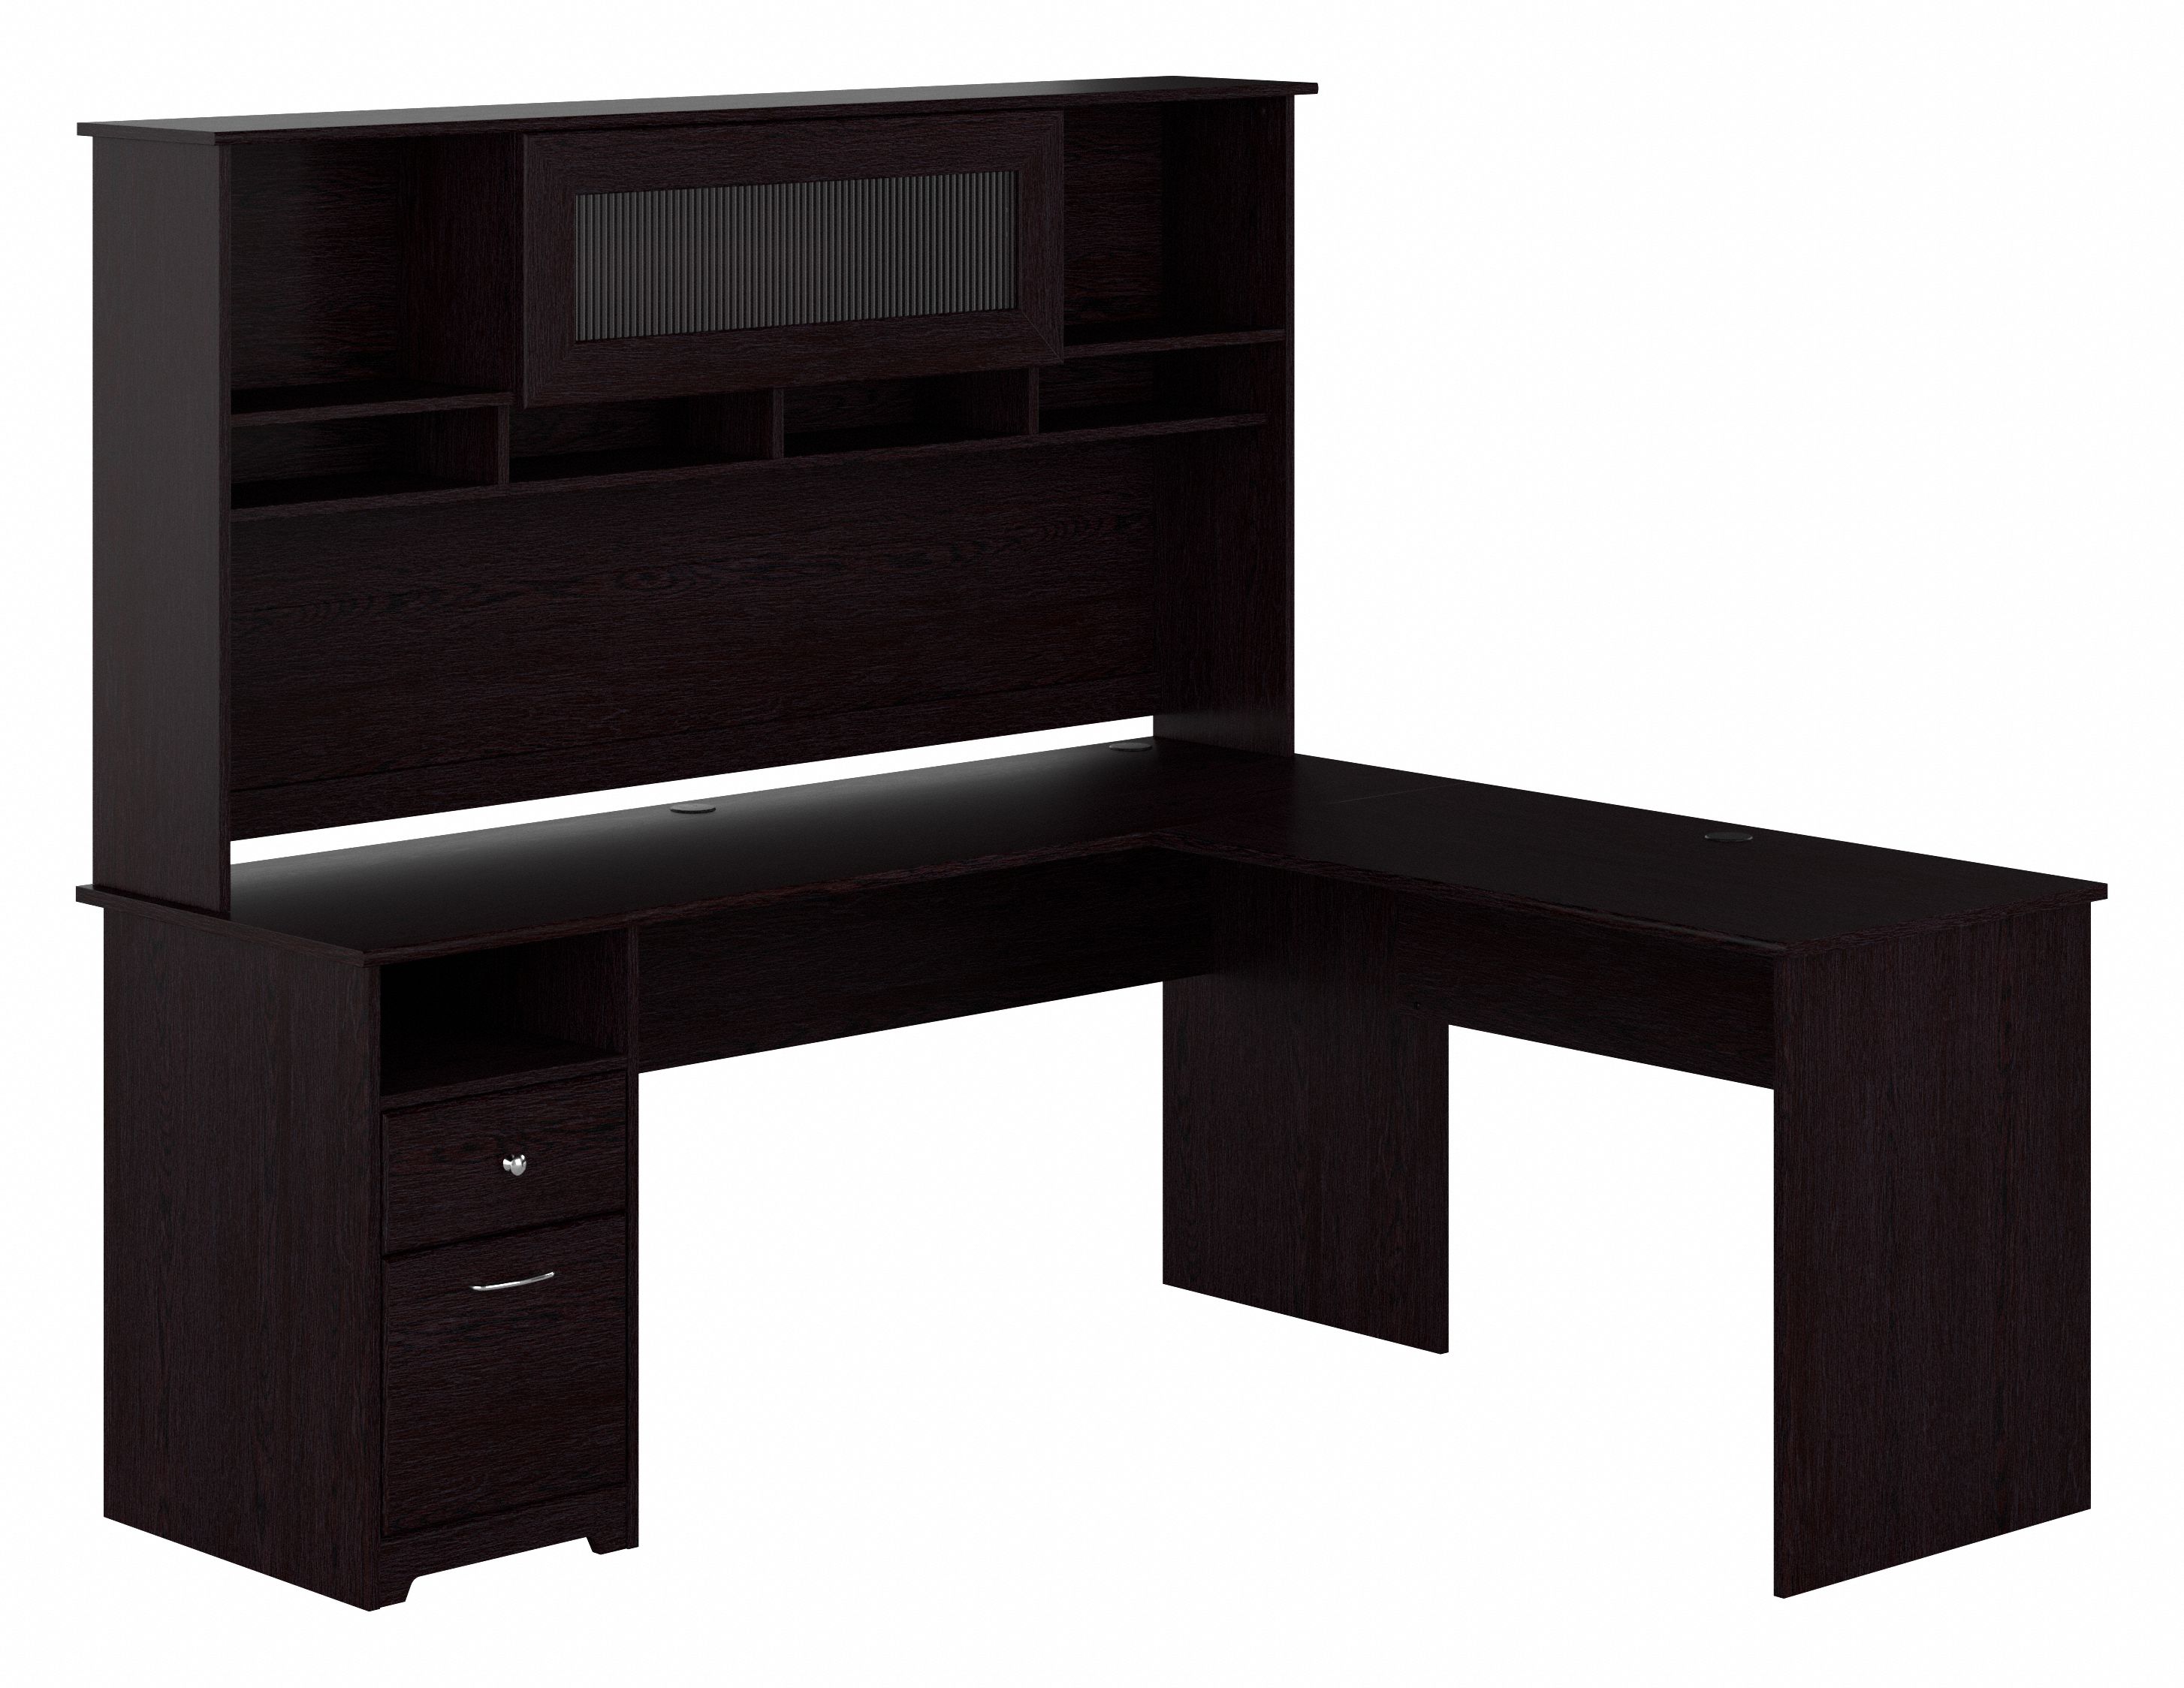 Cabot Collection | 72W L Shaped Computer Desk with Hutch and Drawers | Espresso Oak | CAB053EPO